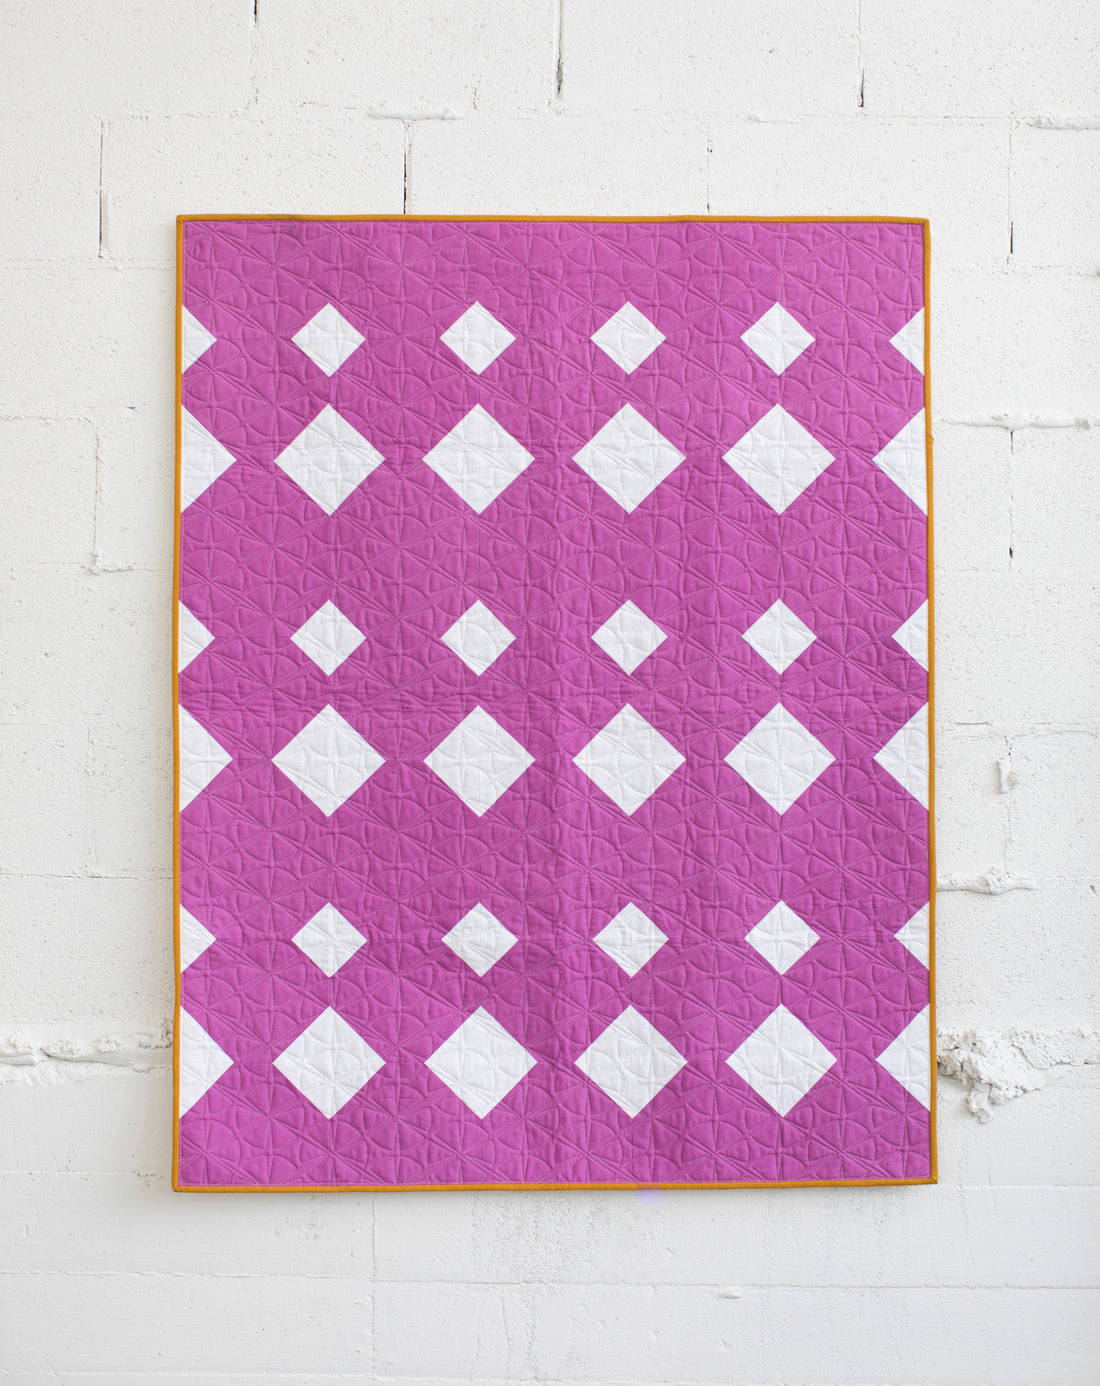 Paper Cuts - the Modern Baby one + all the quilts together